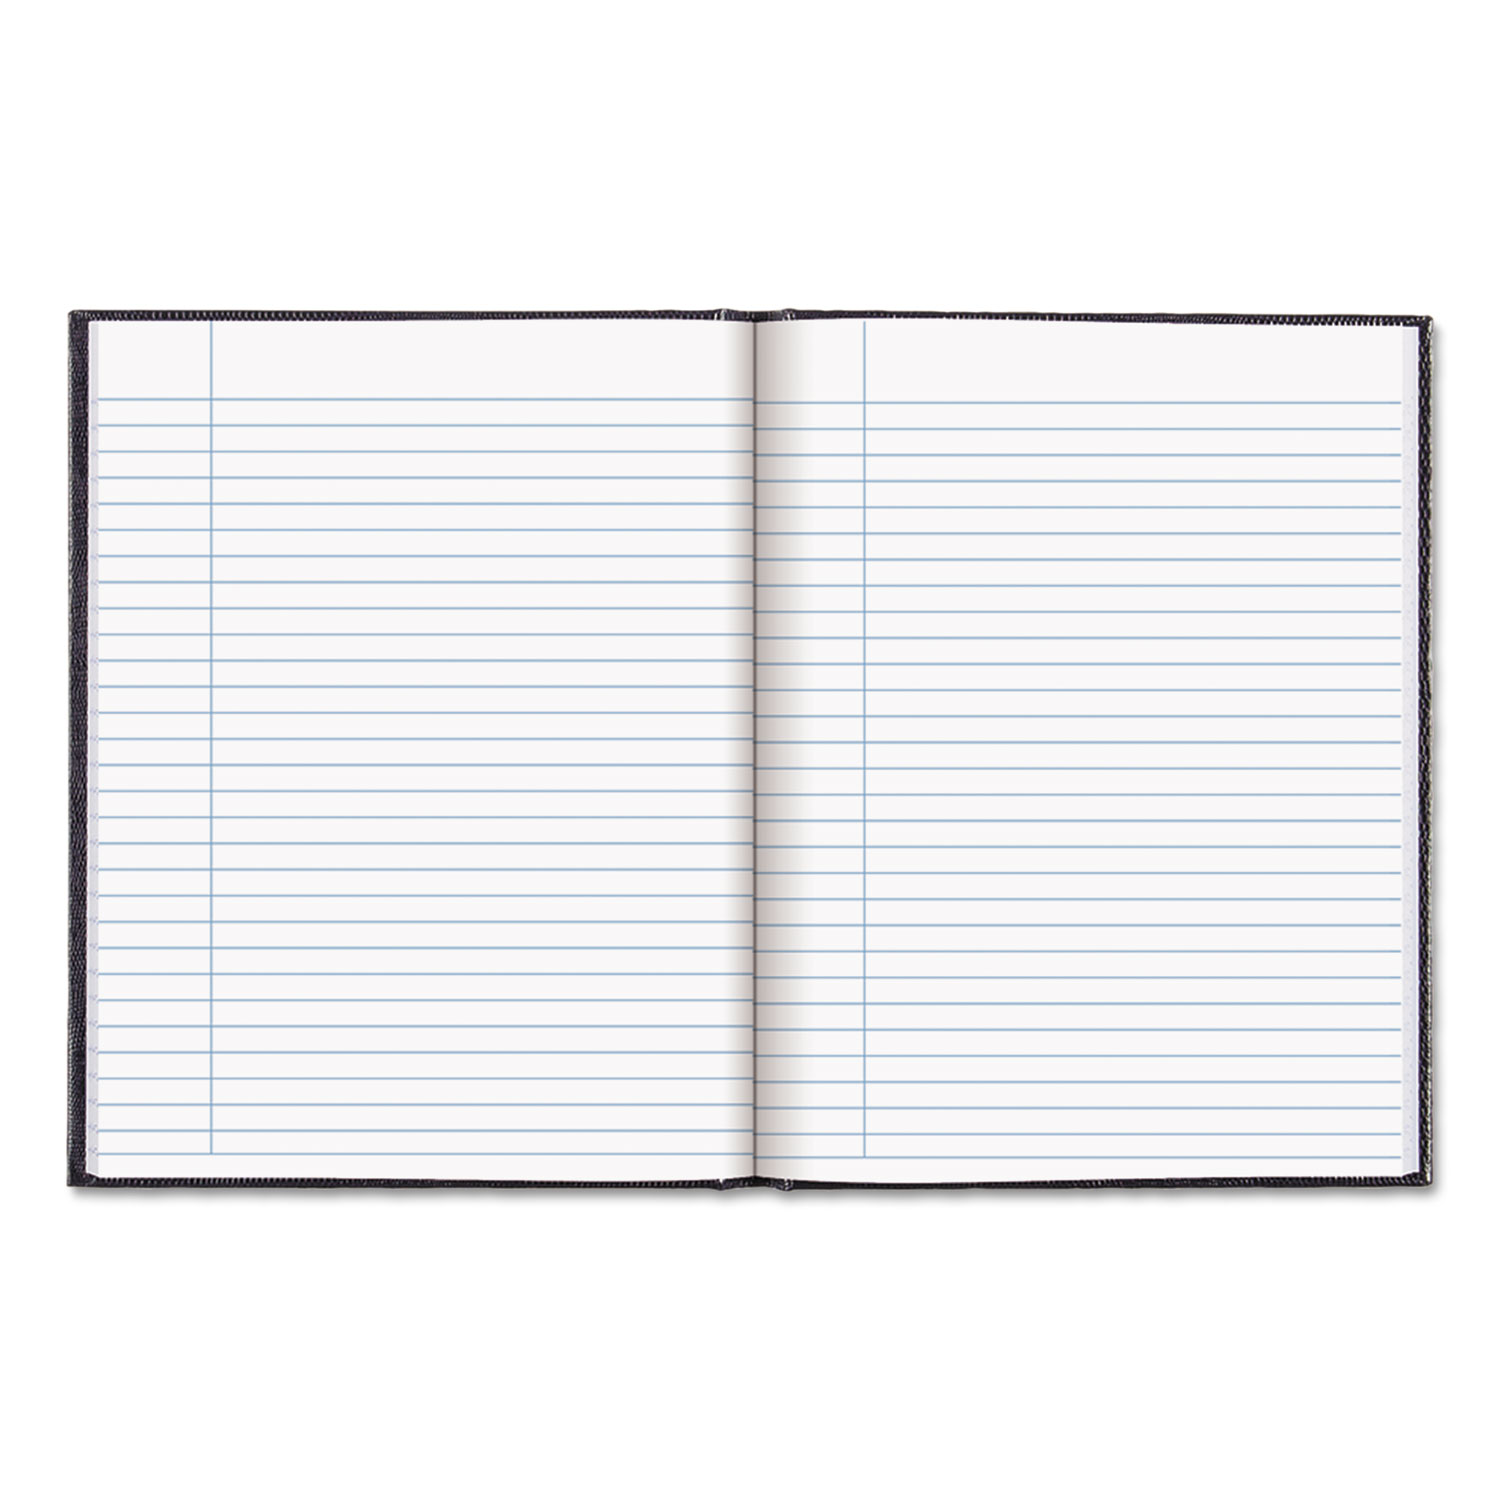 Executive Notebook, College/Margin Rule, 9 1/4 x 7 1/4, White, 150 Sheets